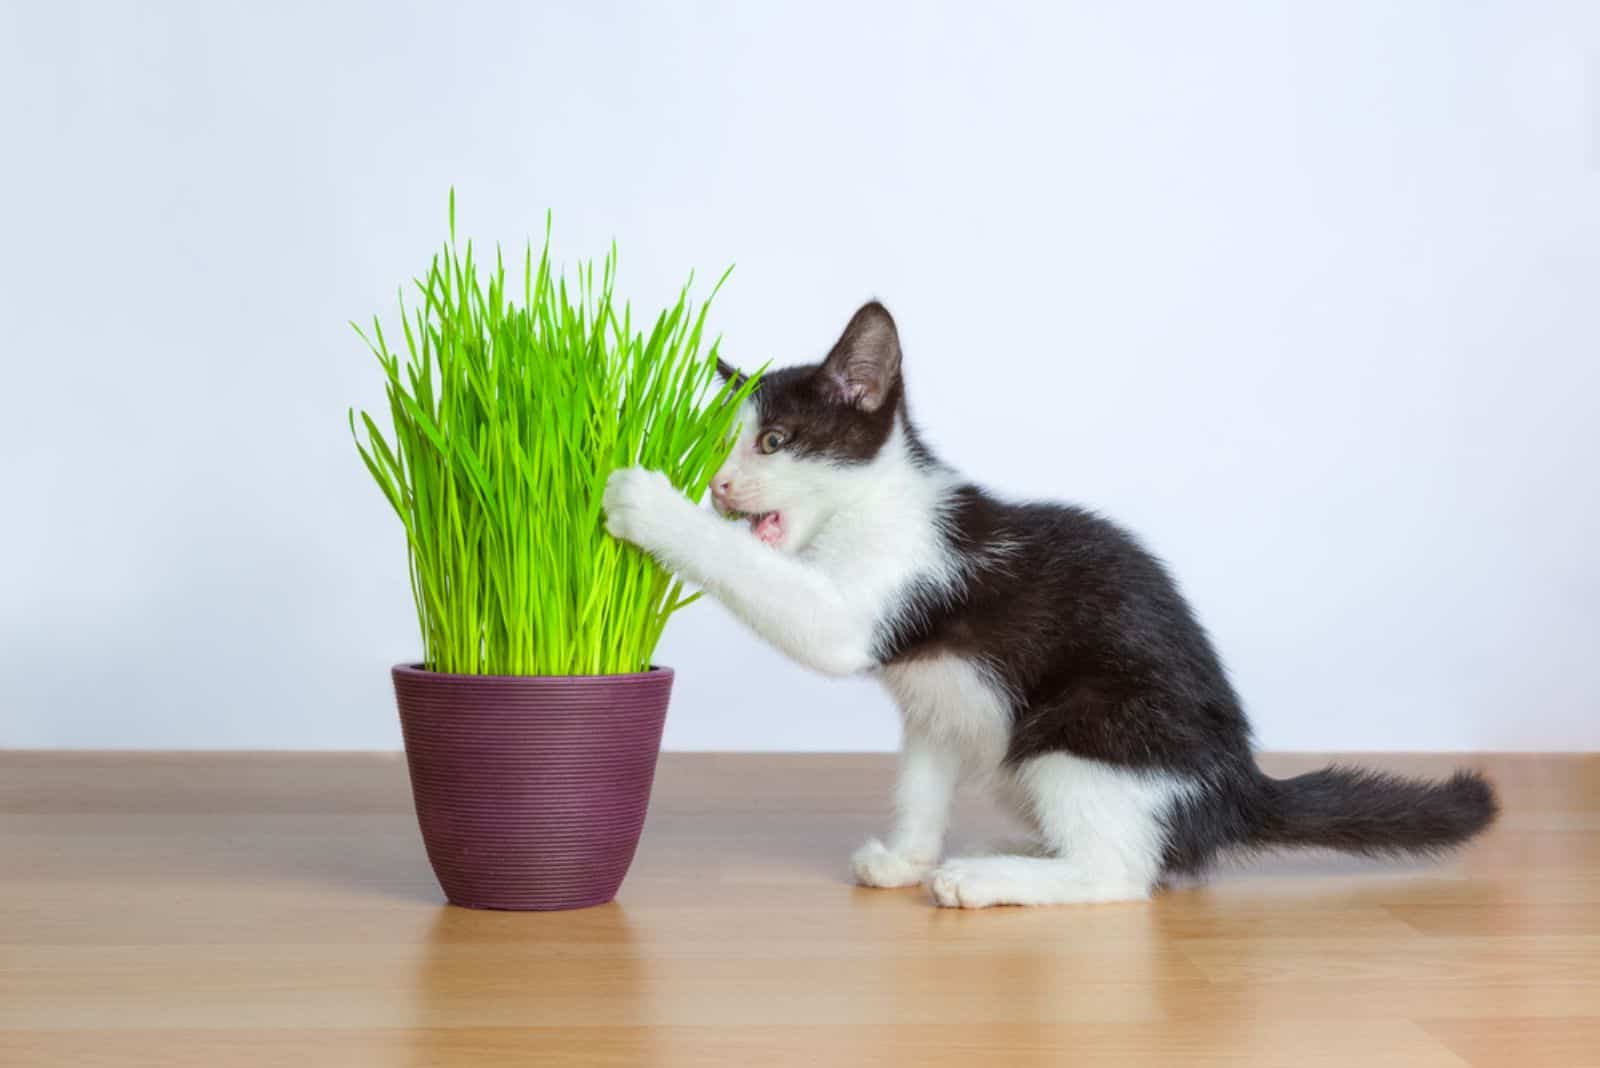 Baby cat eating wheat grass 